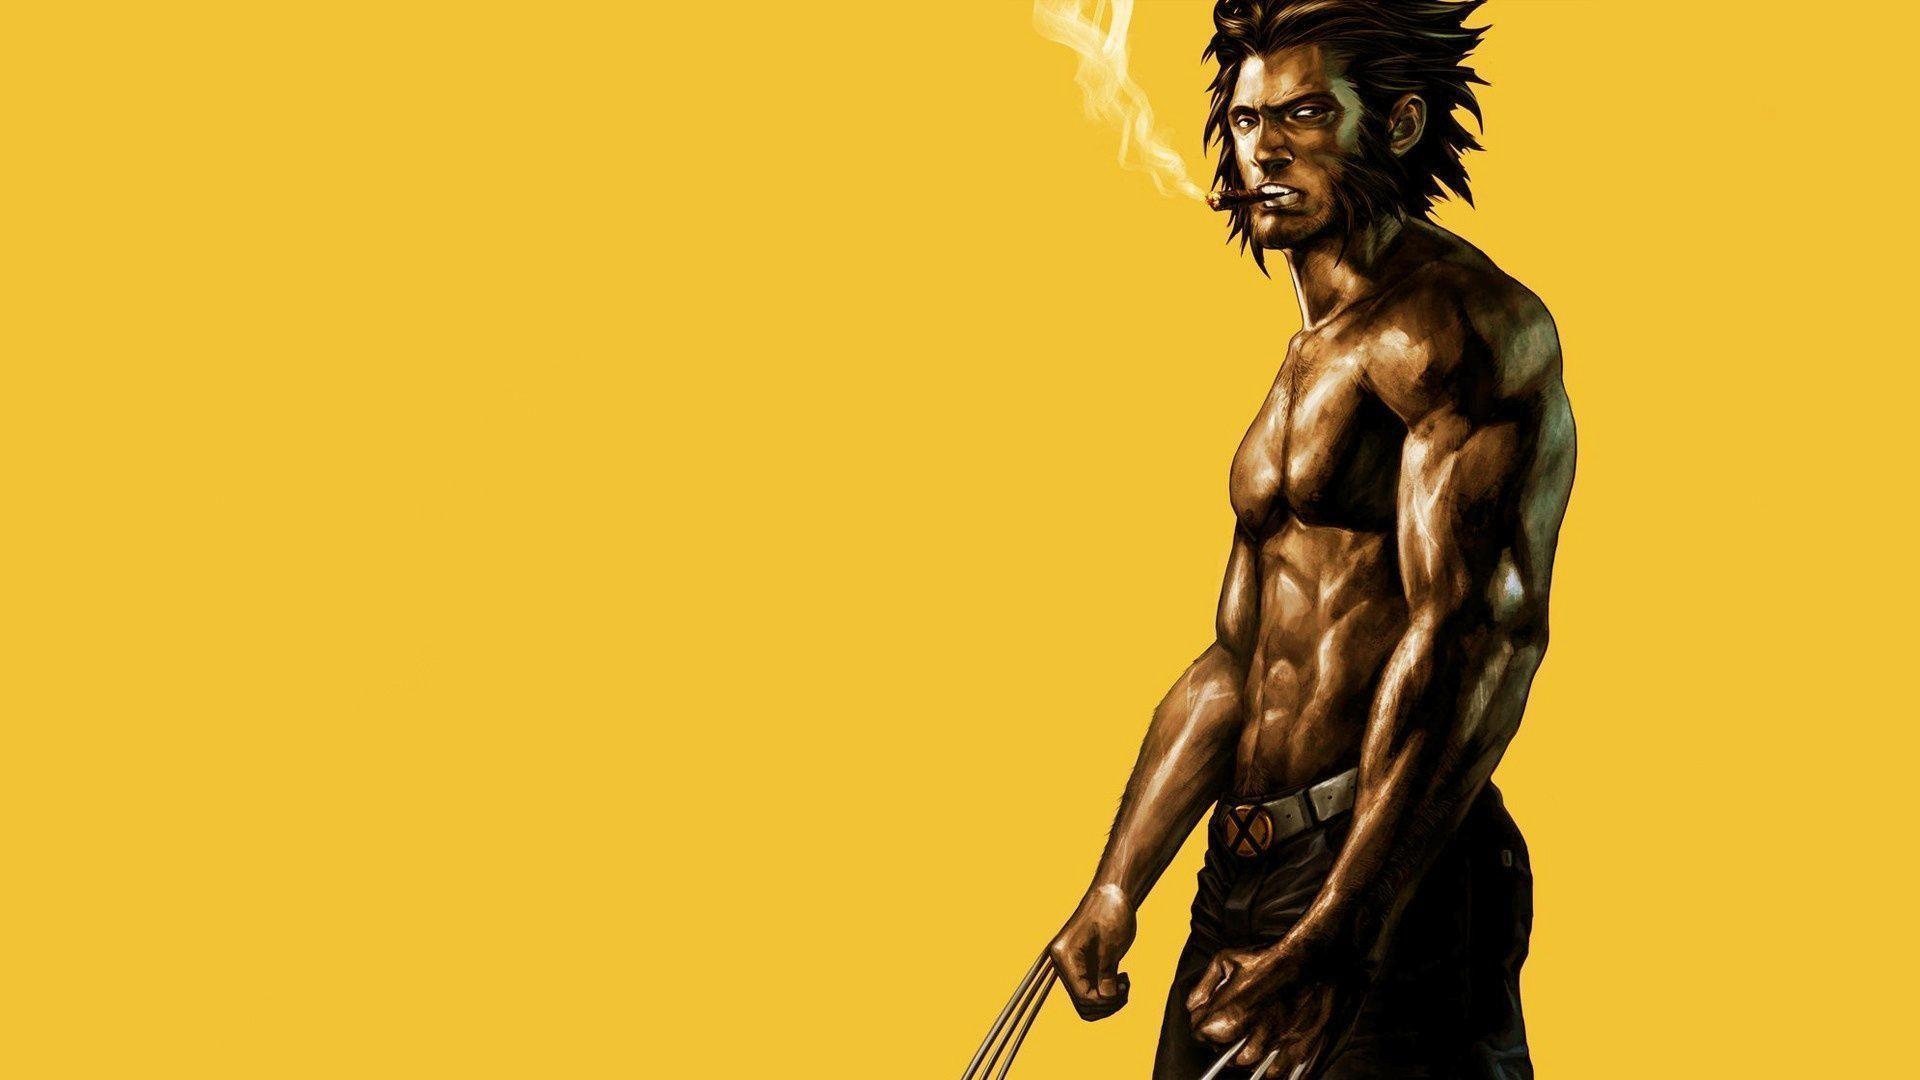 Related Picture Download Wolverine Wallpaper Picture Of Wolverine